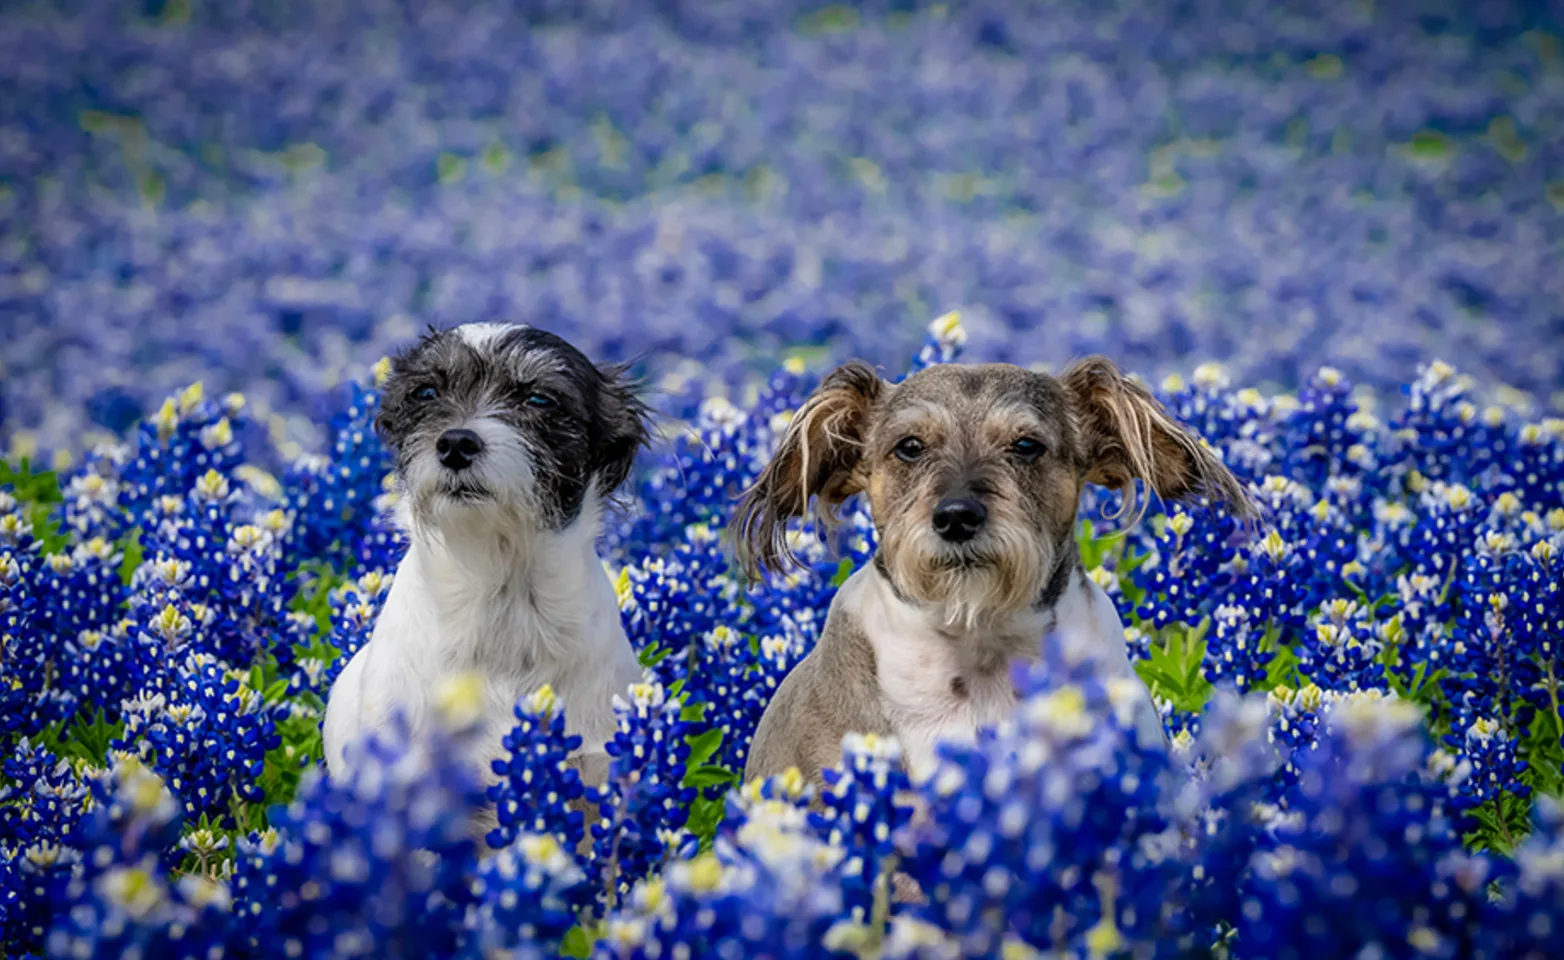 Two dogs sitting in a field of blue flowers